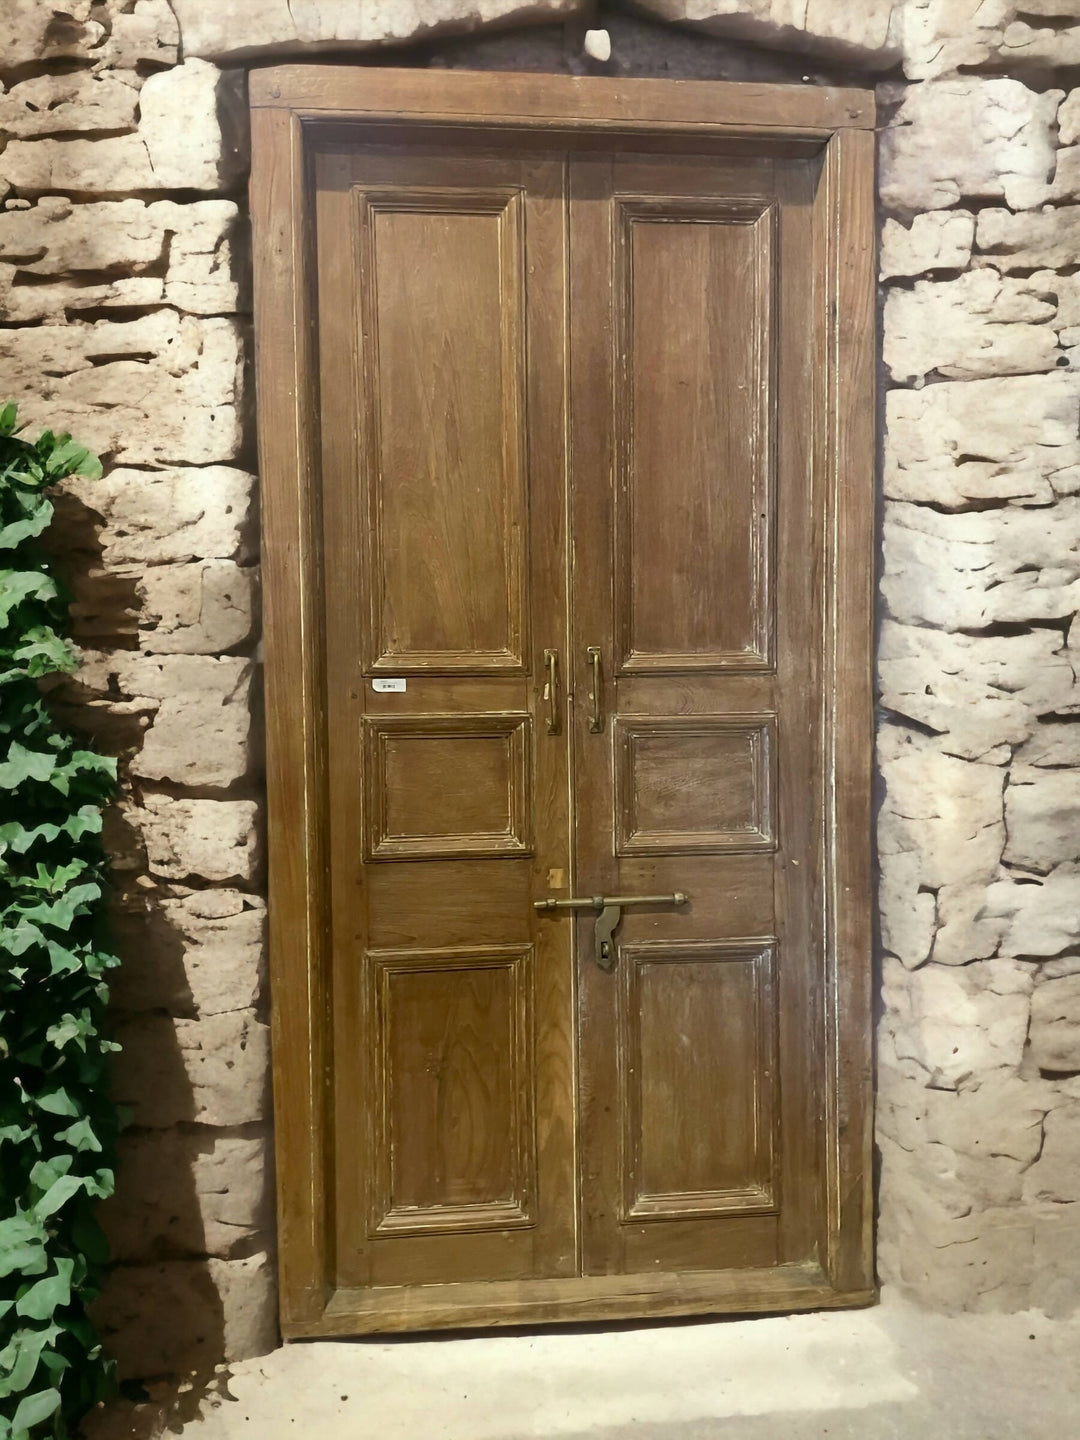 One hundred year old one-of-a-kind real door America Reclaimed